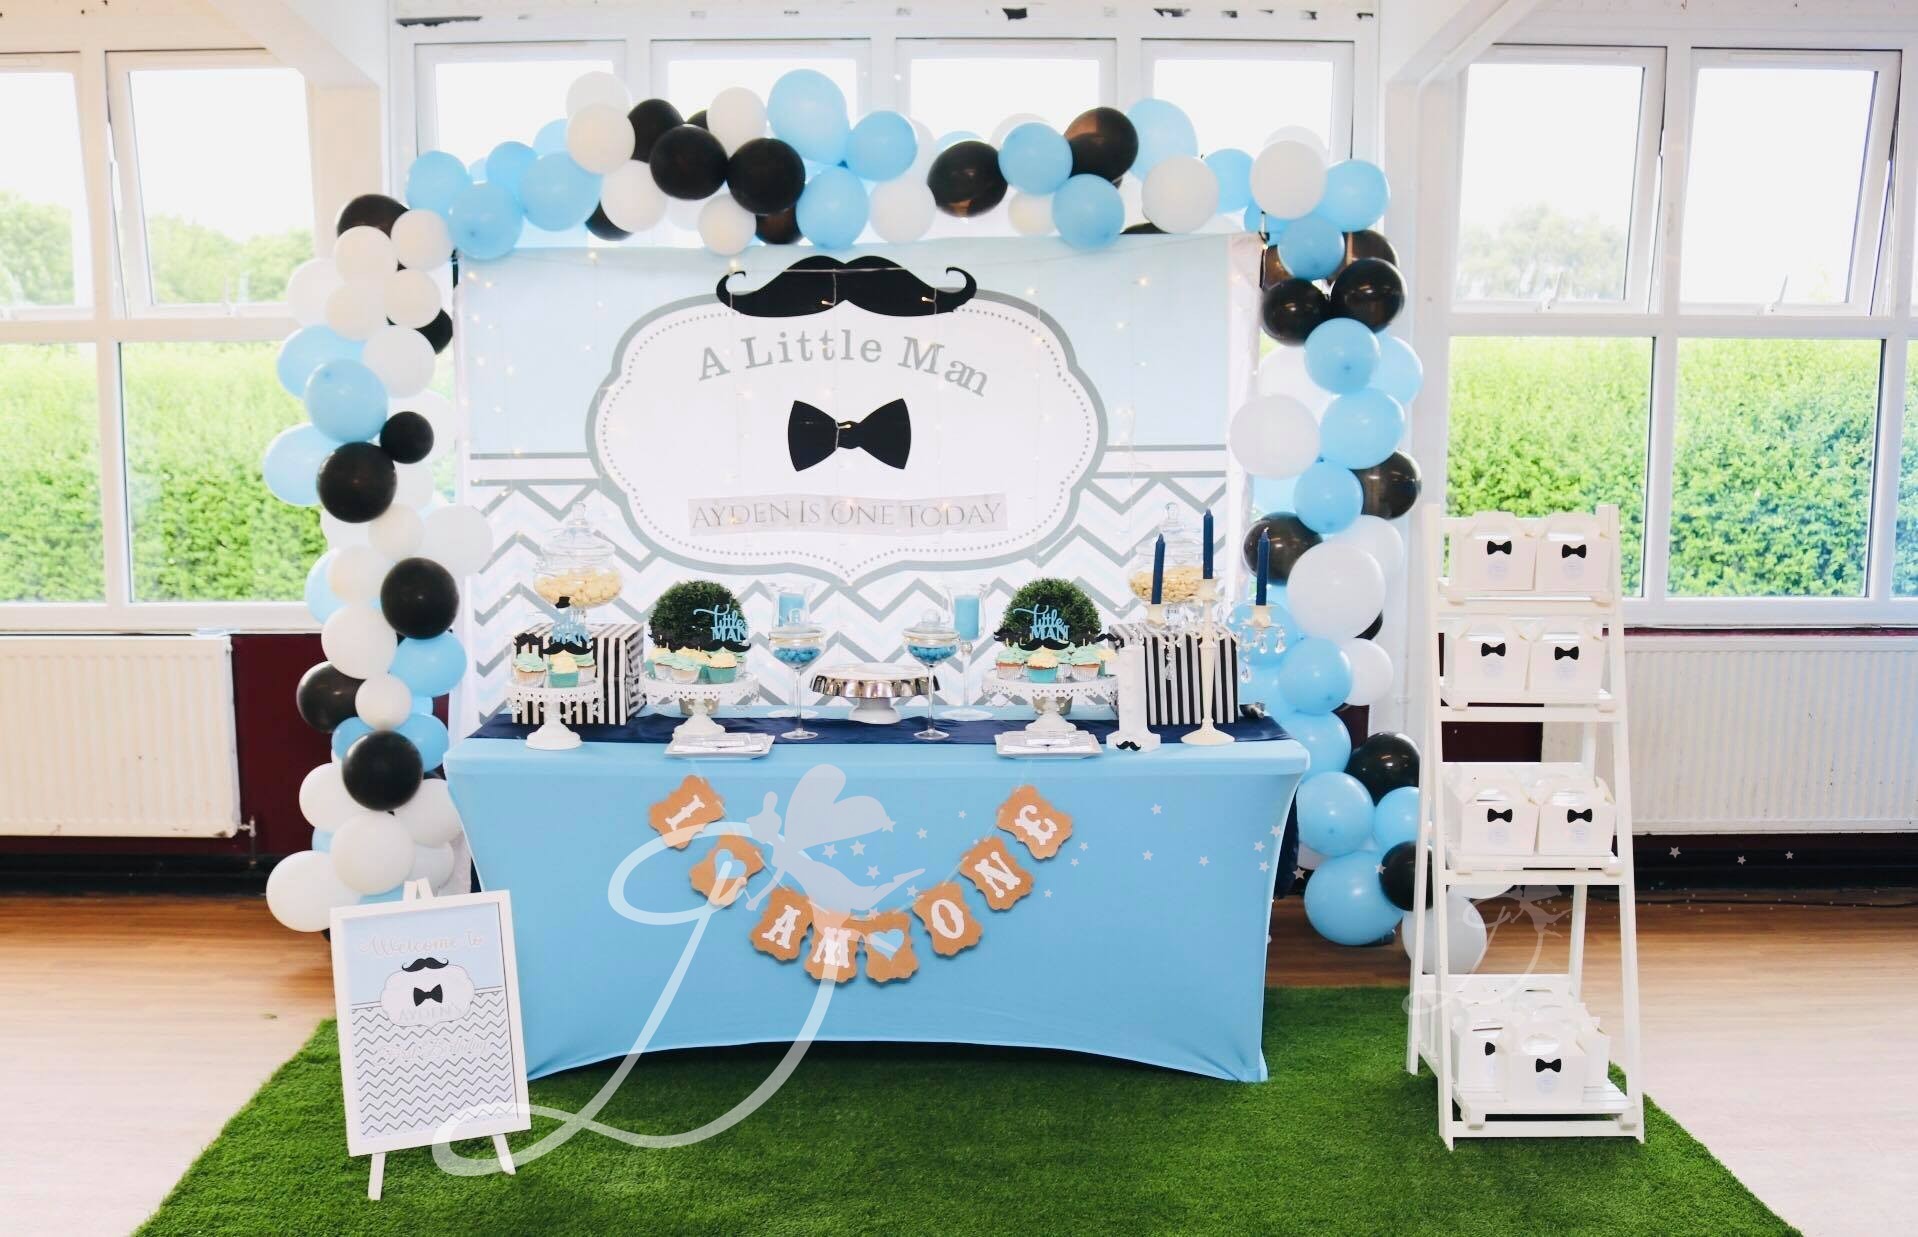 Gorgeous Little Man setup for beautiful baby Ayden's very first birthday party